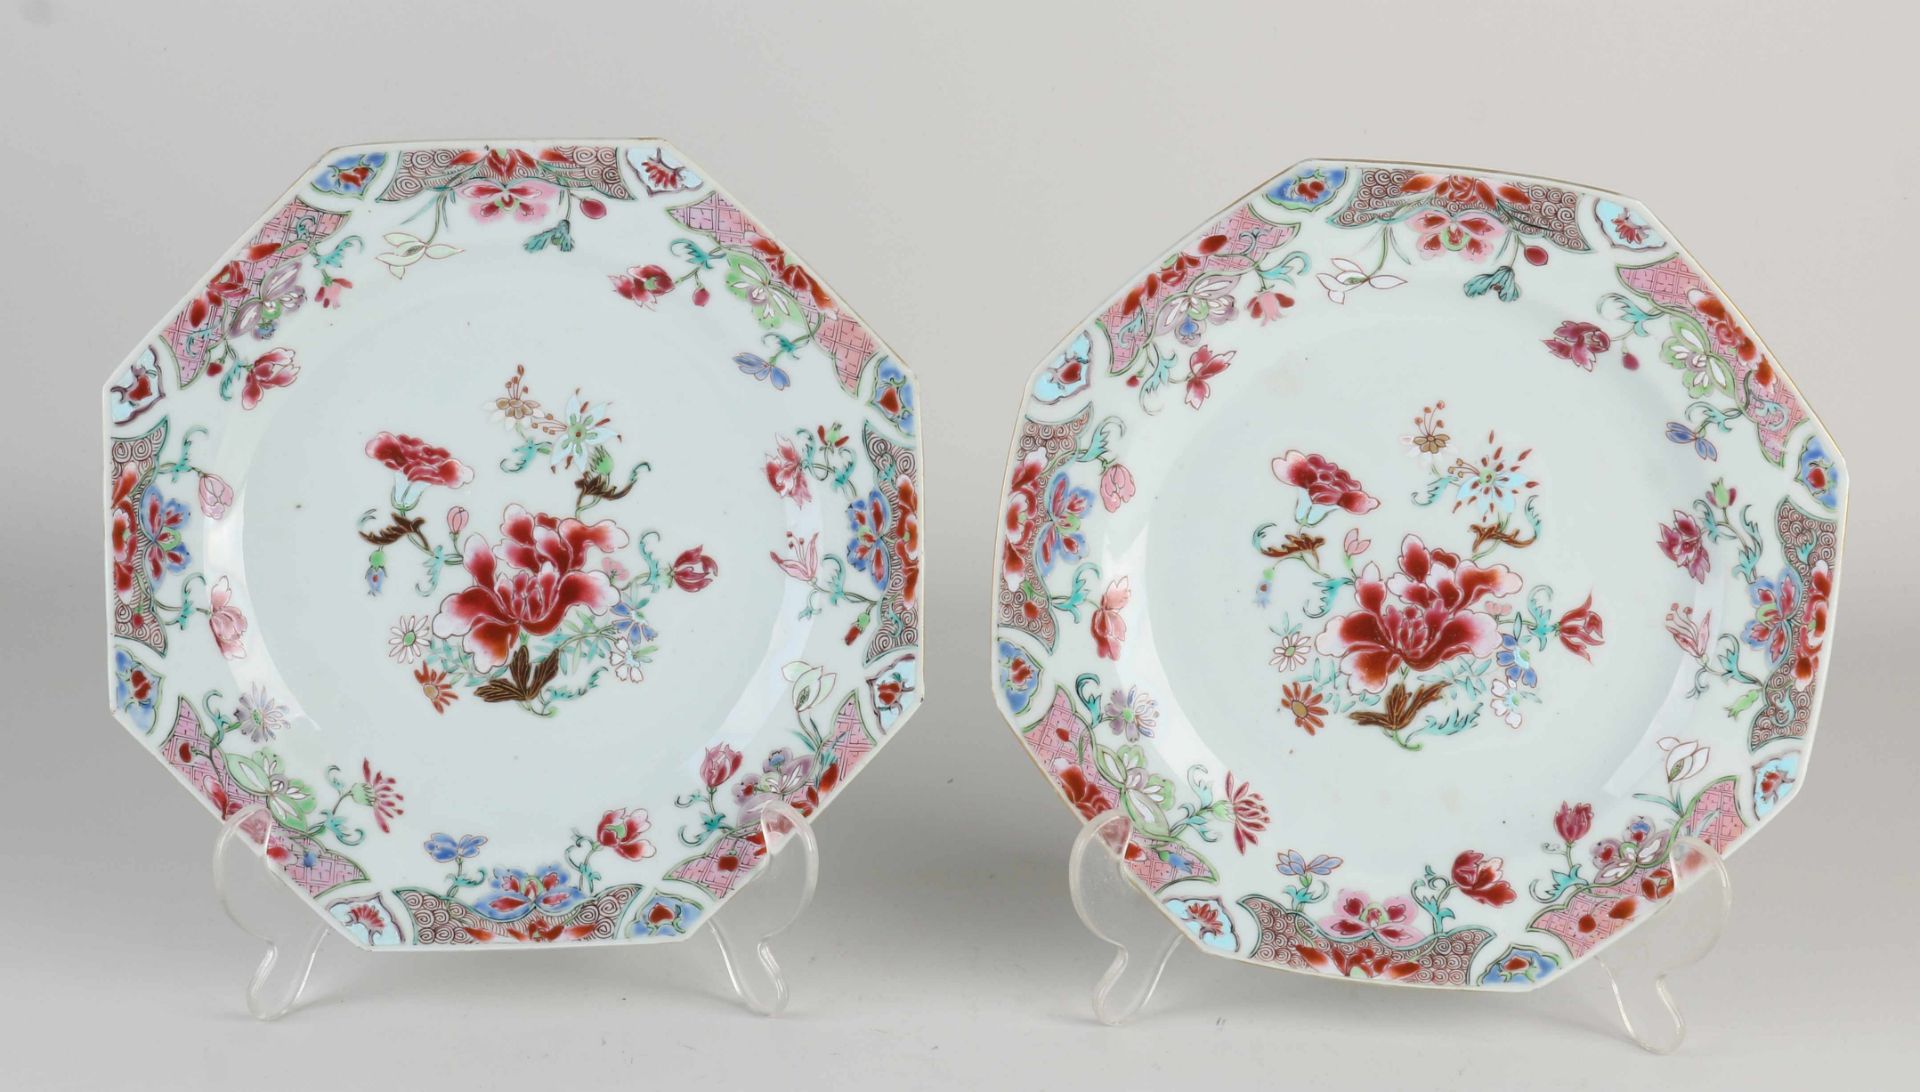 Two 18th century Chinese Family Rose dishes, Ø 21.3 - 21.5 cm.